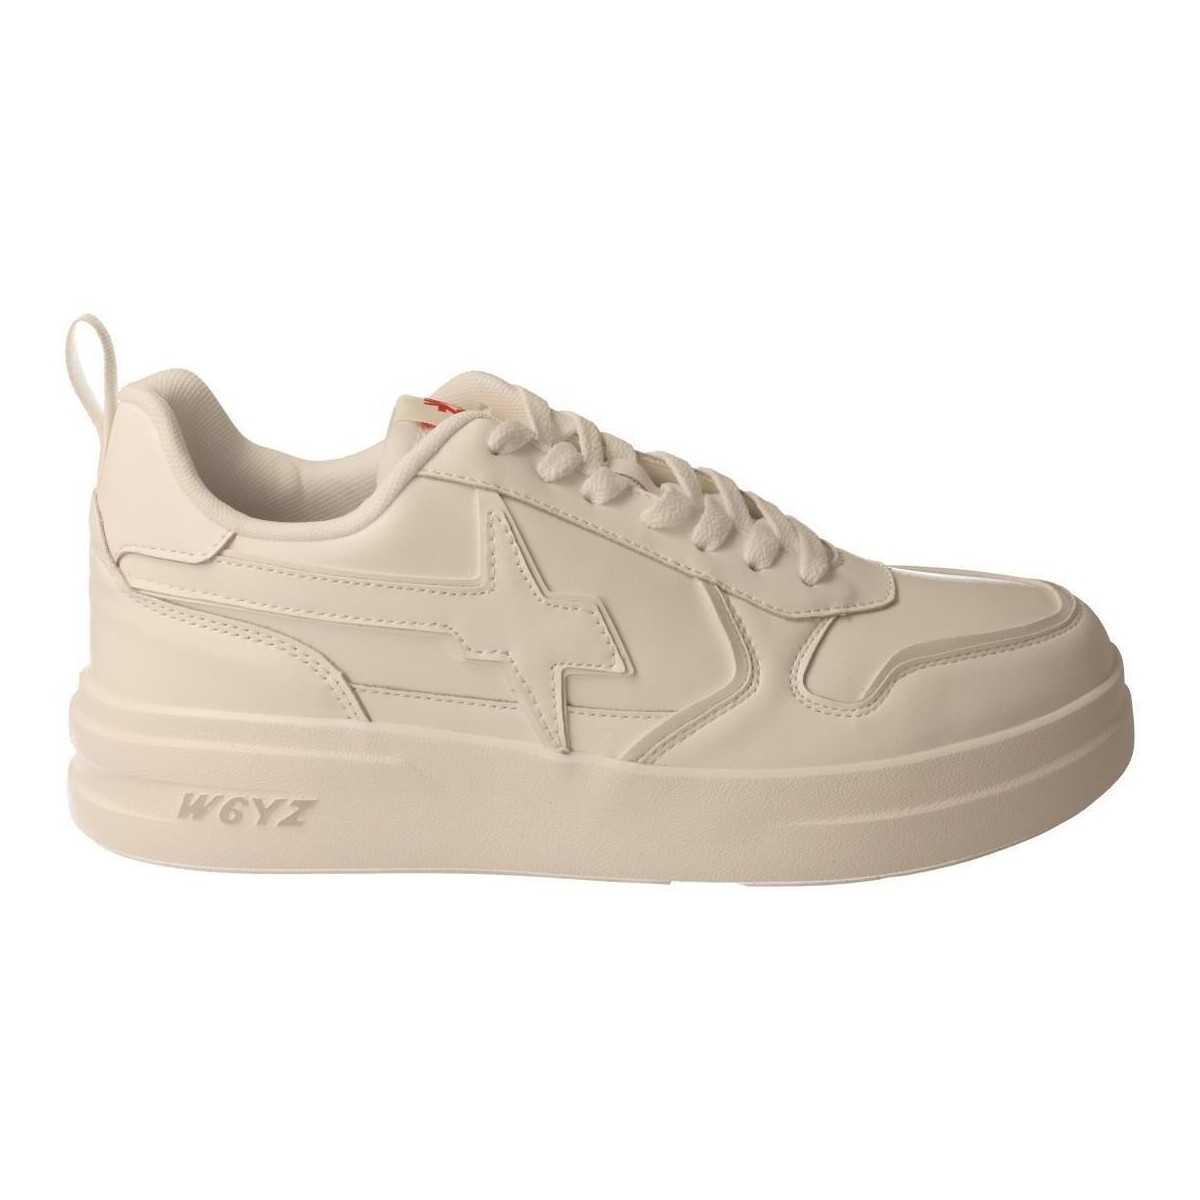 Chaussures Homme Baskets basses W6yz  Blanc